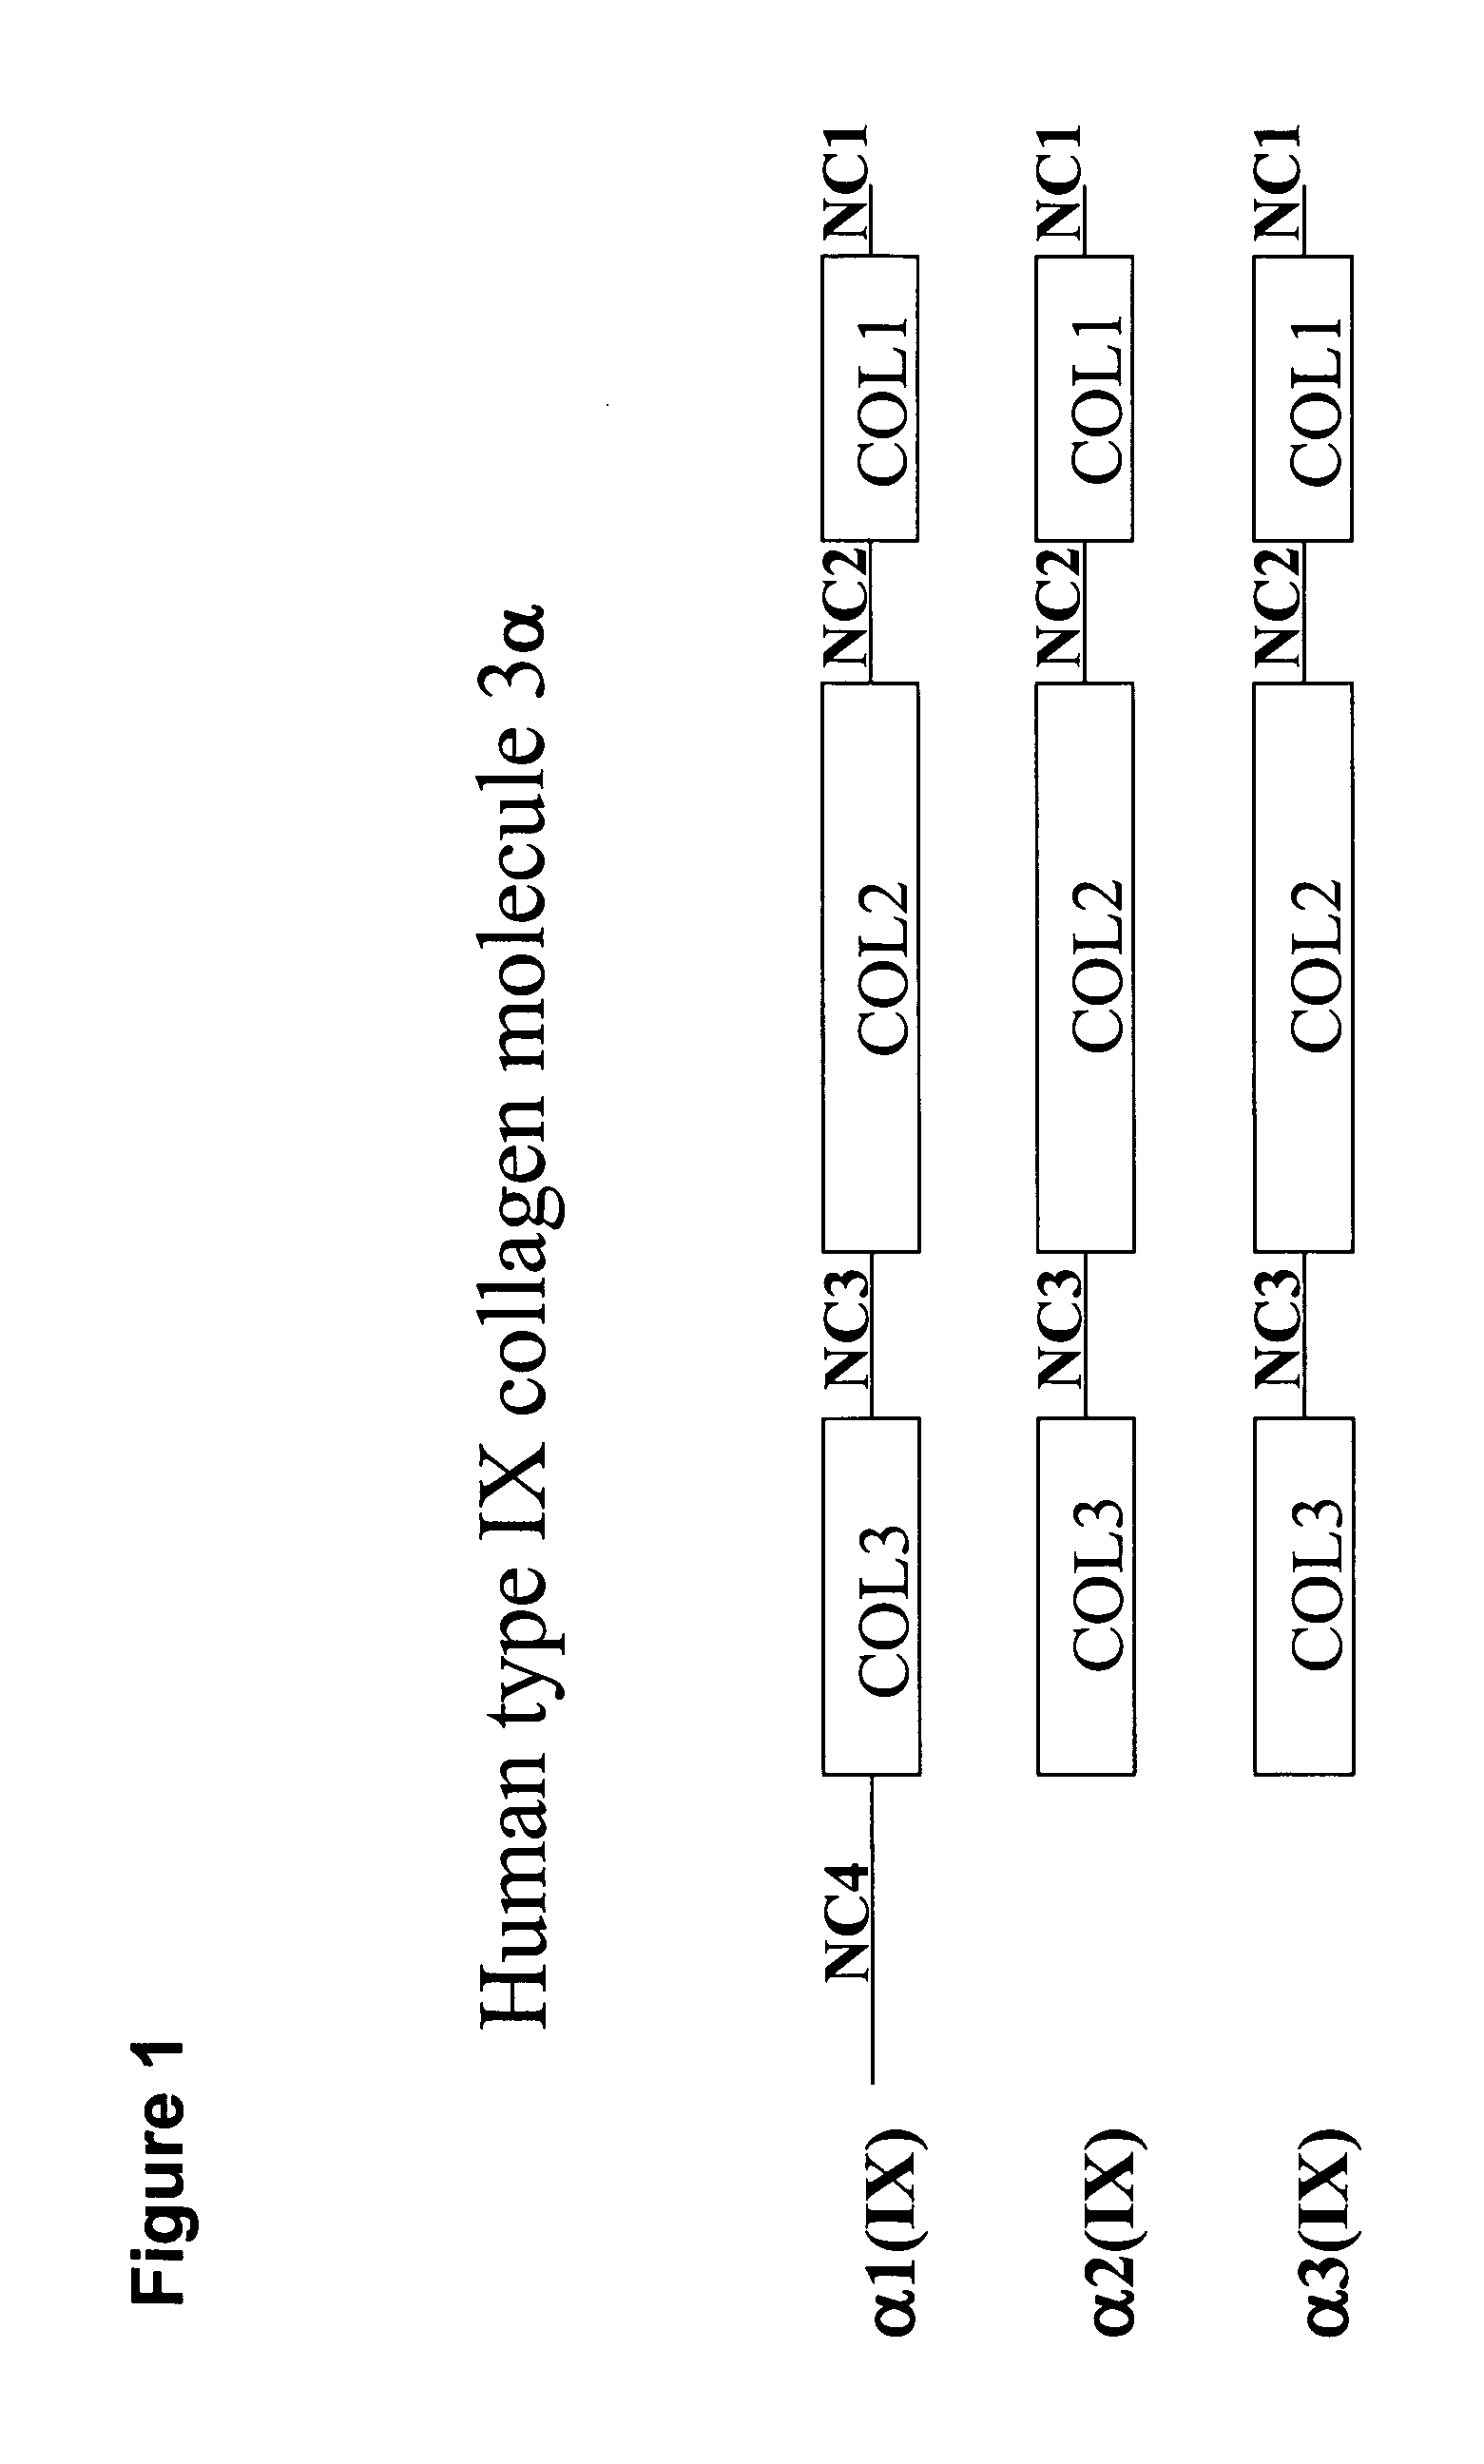 Connective tissue derived polypeptides